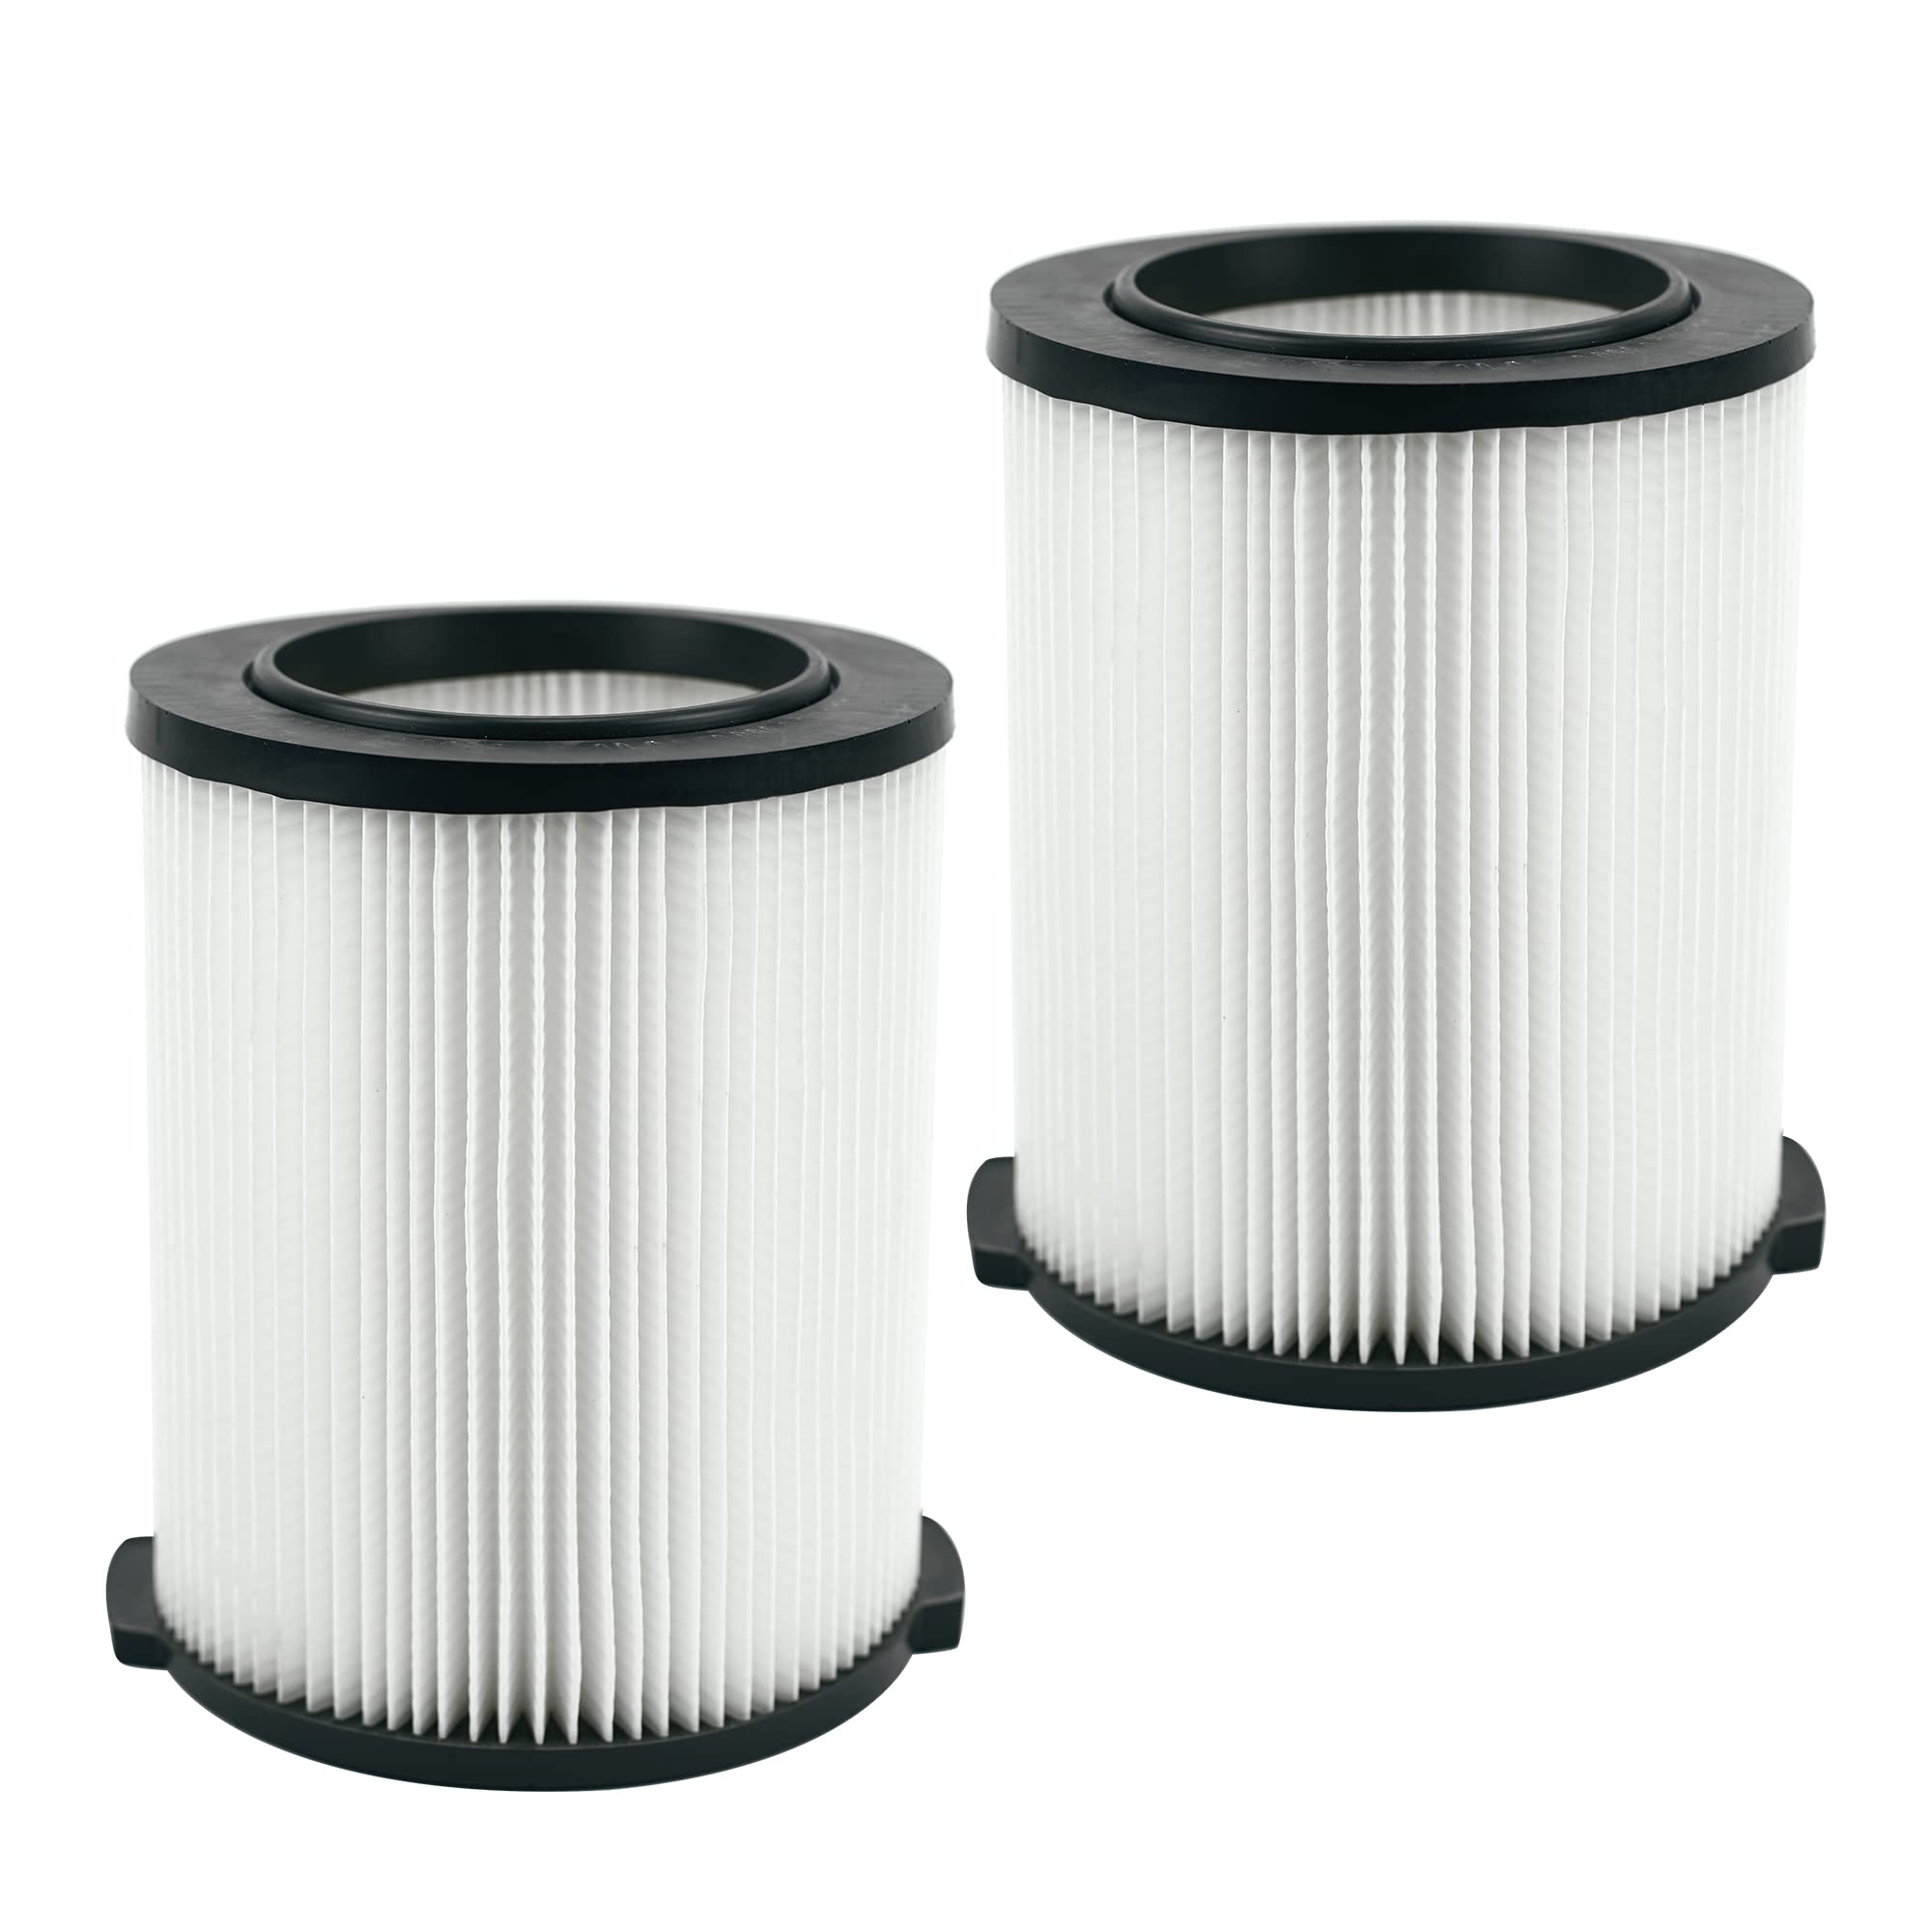 VF4000 Replacement Cartridge Filter for ridged 72947 Wet Dry Vac 5 to 20-Gallon 6-9 Gal husky Compatible with RV2400A RV2600B WD5500 WD0671，2 Pack